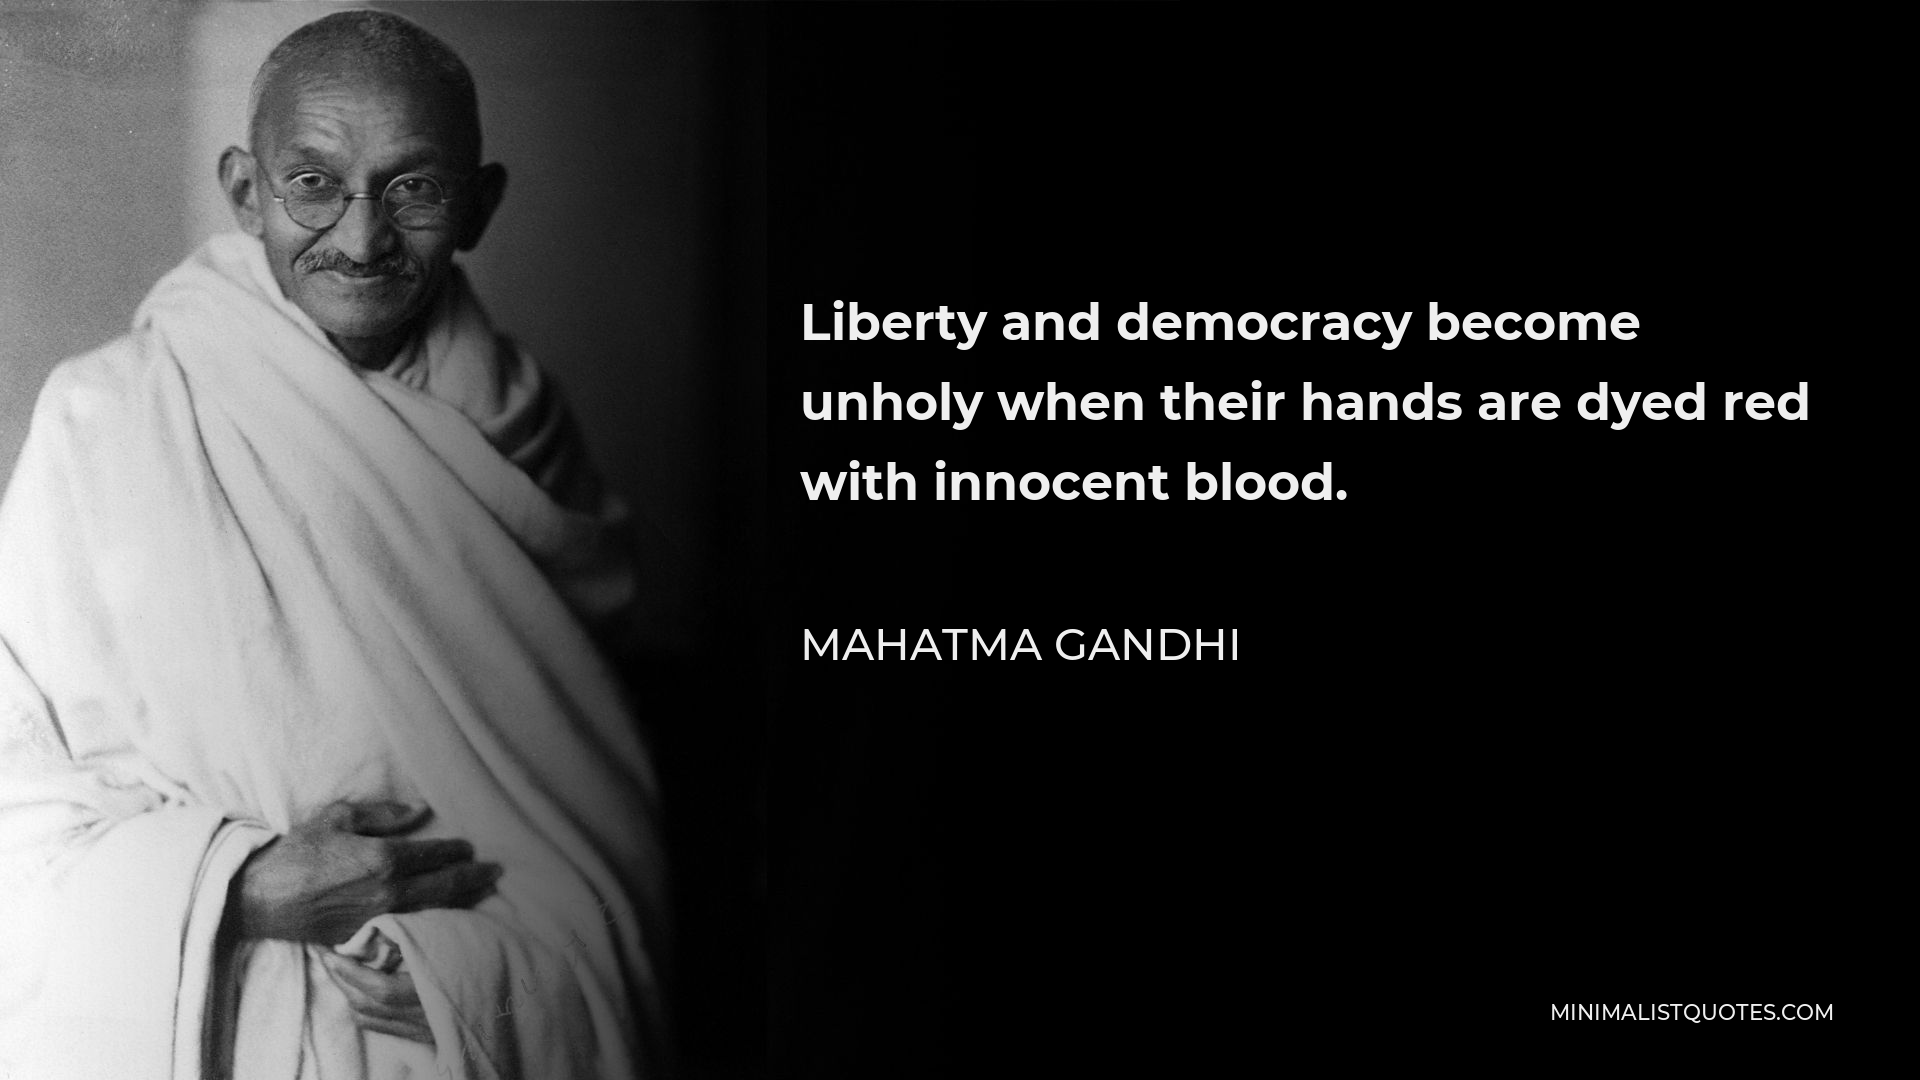 Mahatma Gandhi Quote - Liberty and democracy become unholy when their hands are dyed red with innocent blood.